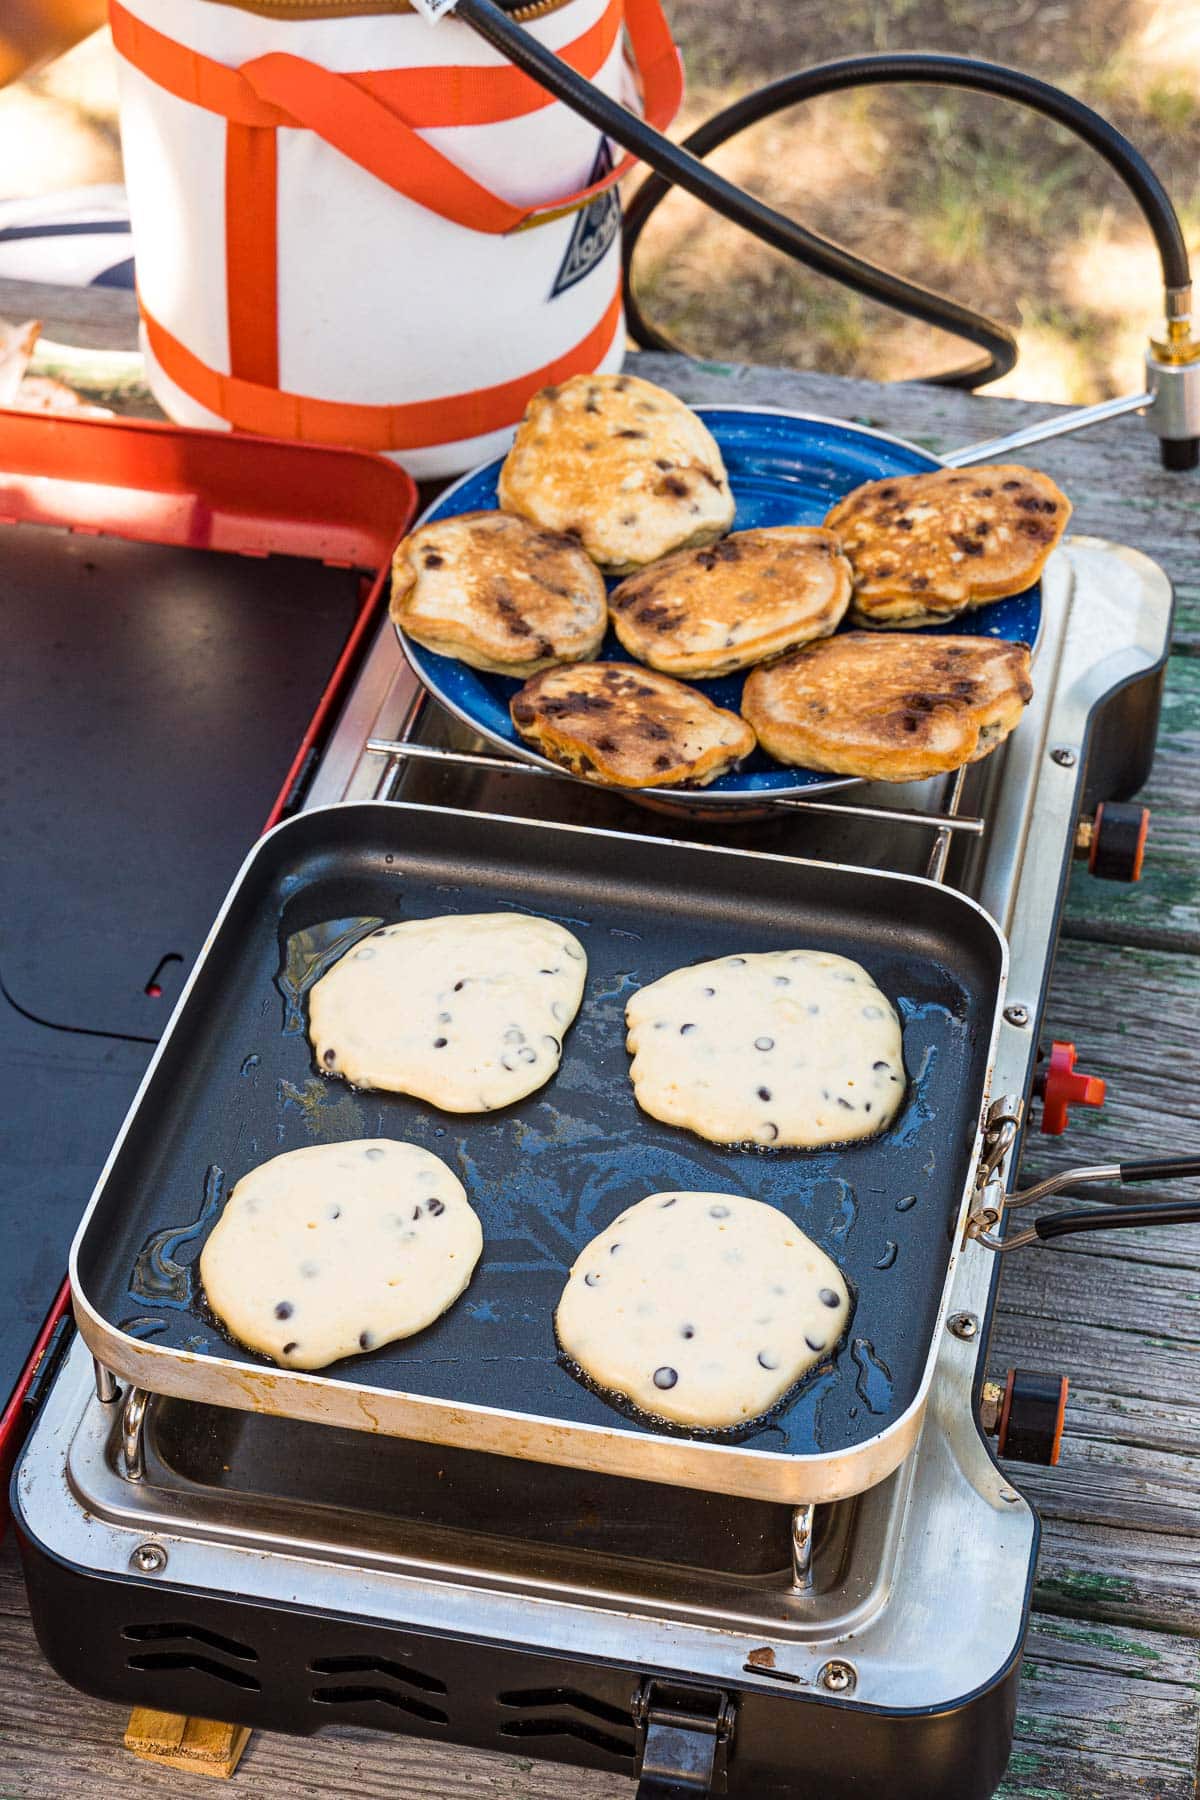 Pancakes in a skillet on a camp stove. To the side there is an enamel plate with cooked pancakes.